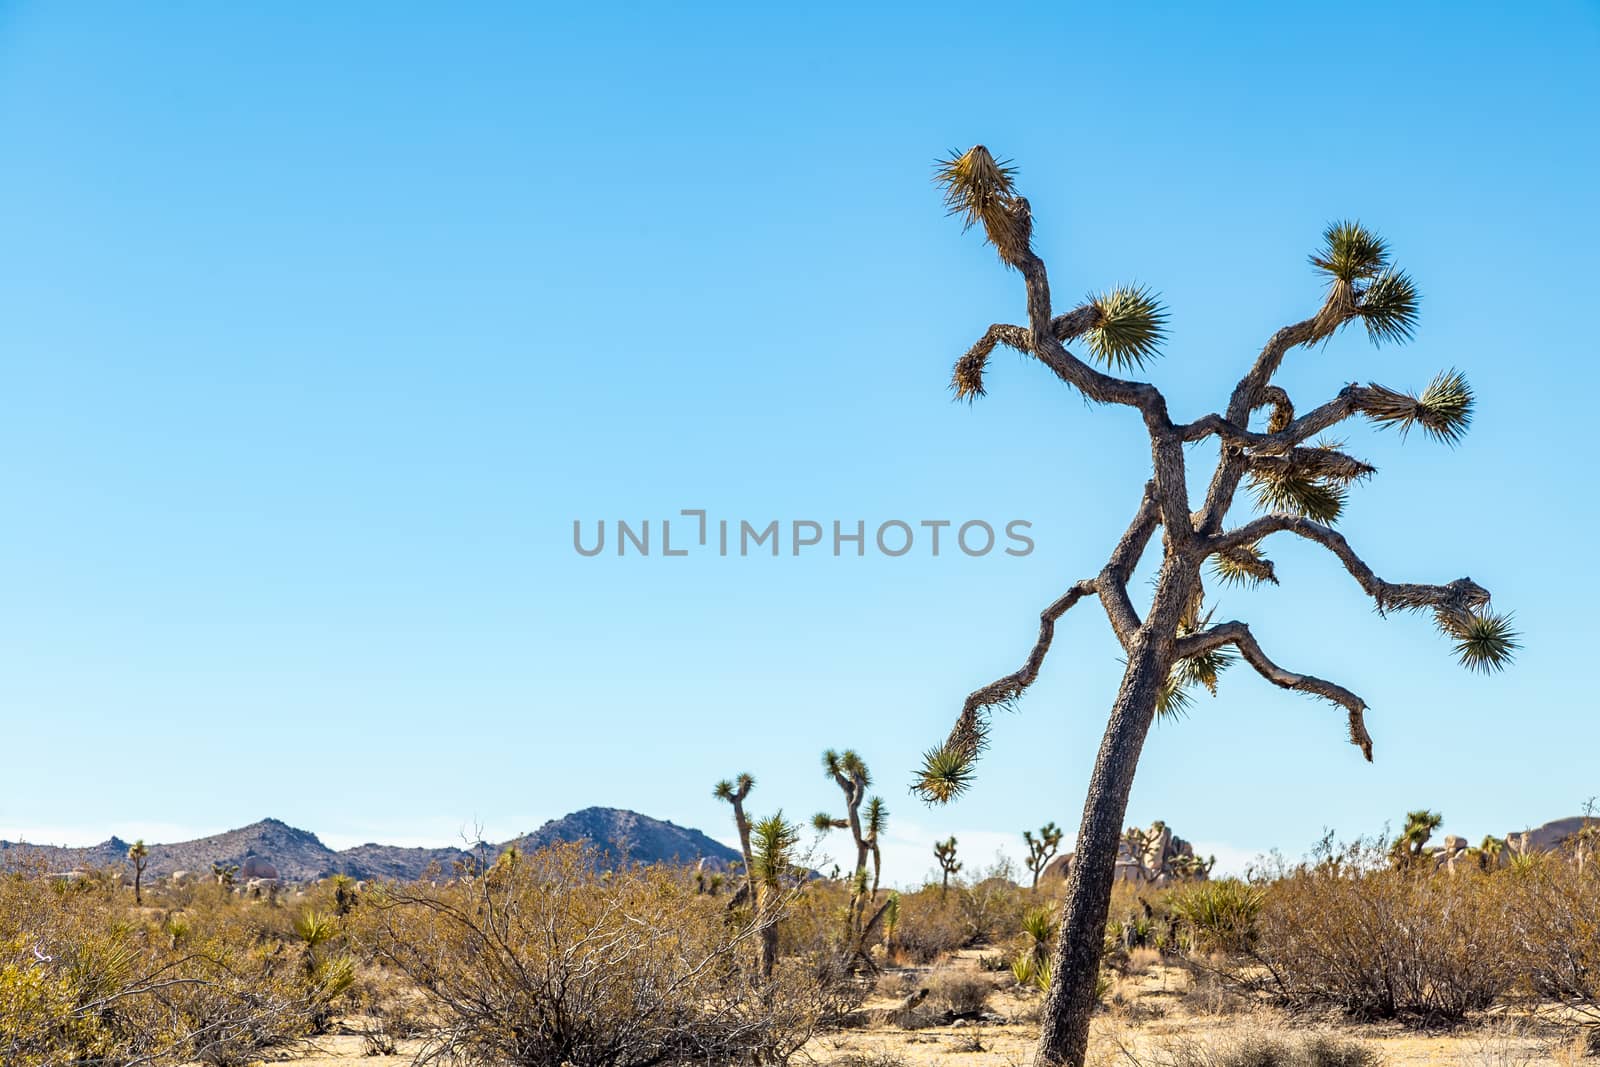 Joshua Tree National Park is a vast protected area in southern California. It's characterized by rugged rock formations and stark desert landscapes.